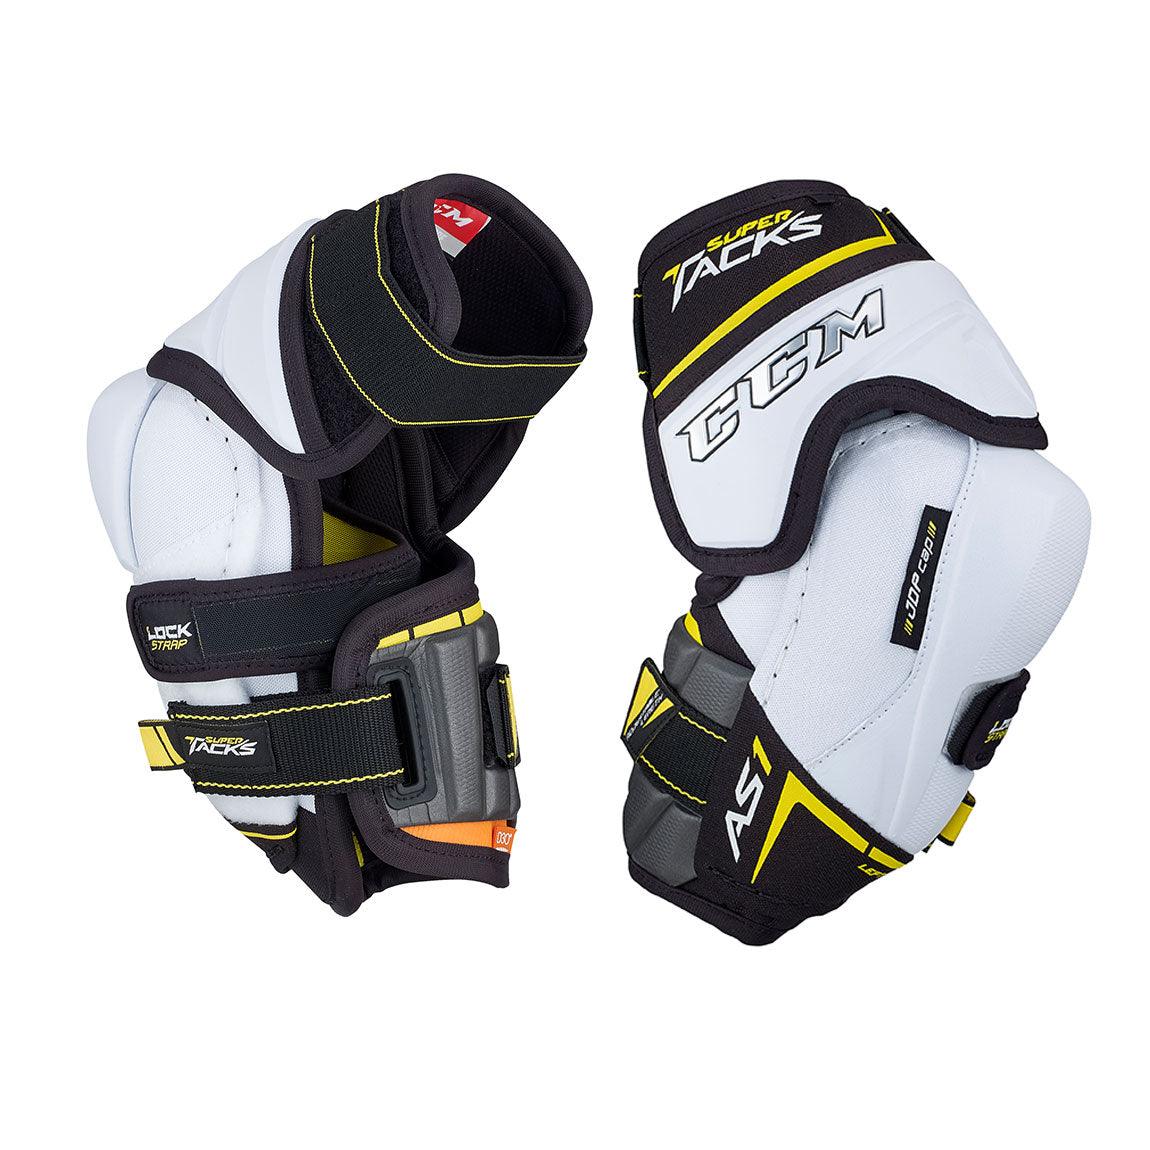 Super Tacks AS1 Elbow Pads - Junior - Sports Excellence